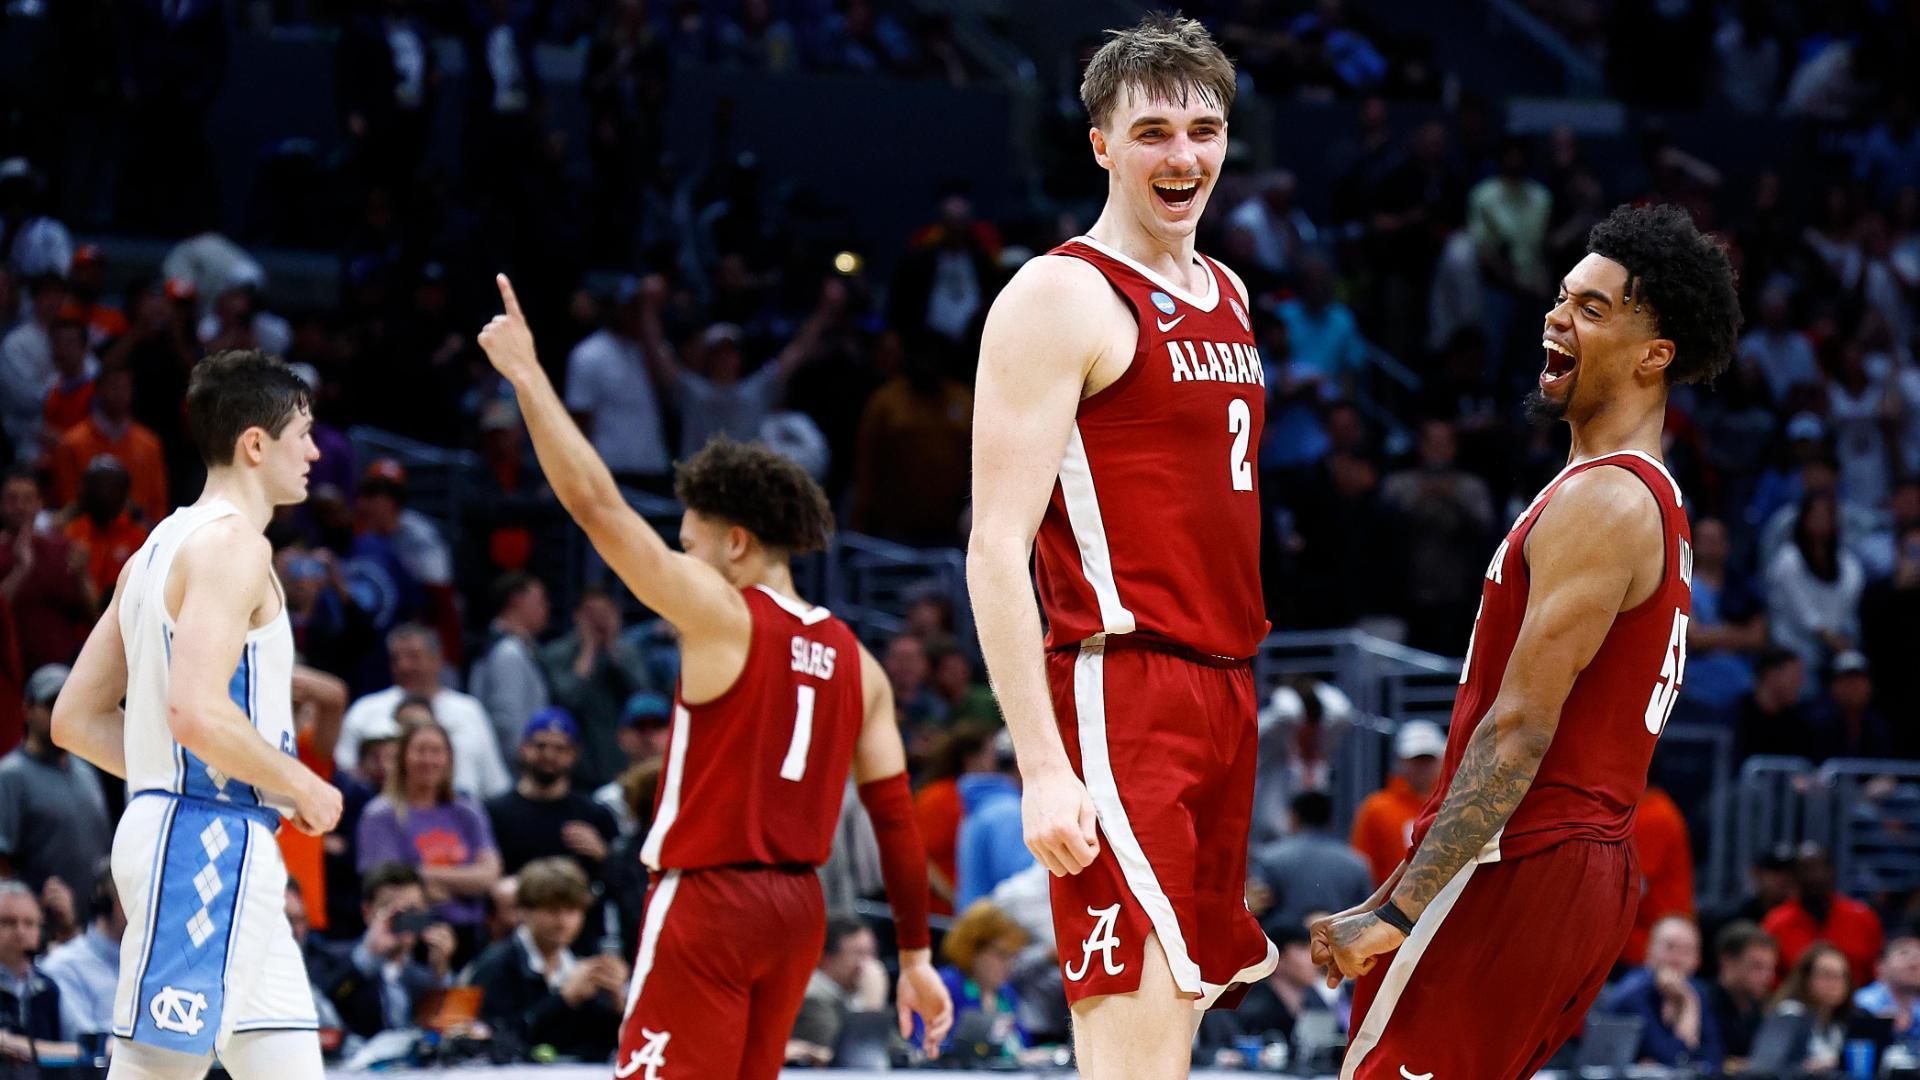 Bama hangs on to knock off No. 1 seed UNC to reach Elite Eight